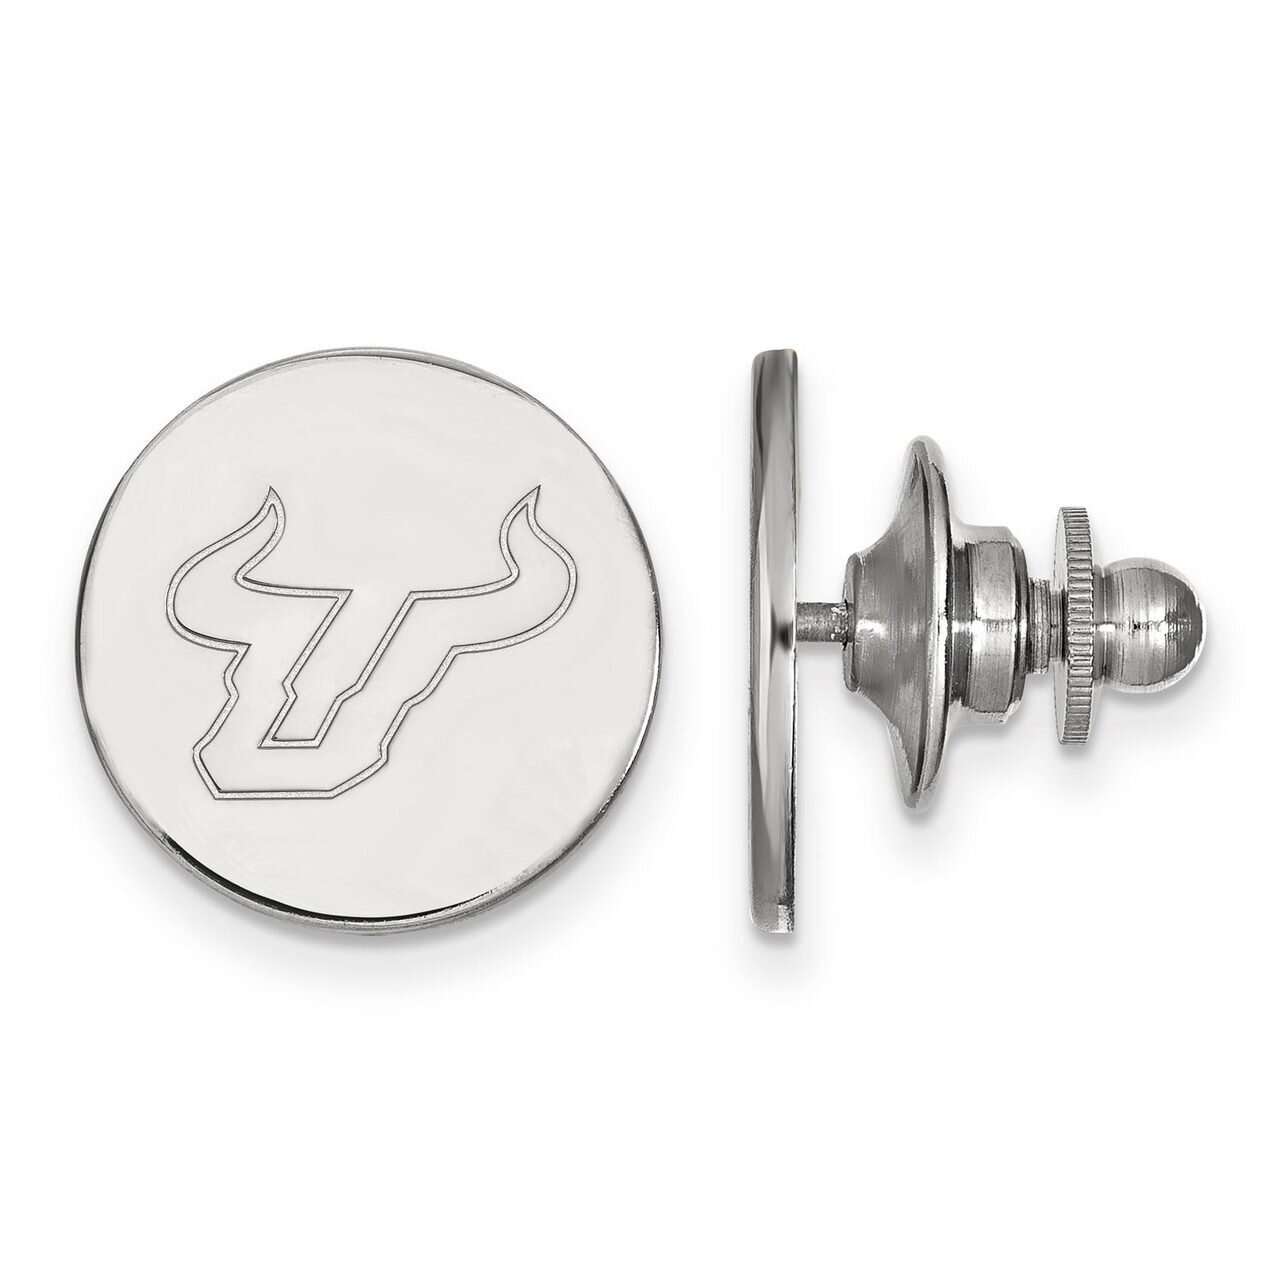 University of South Florida Lapel Pin Sterling Silver SS024USFL